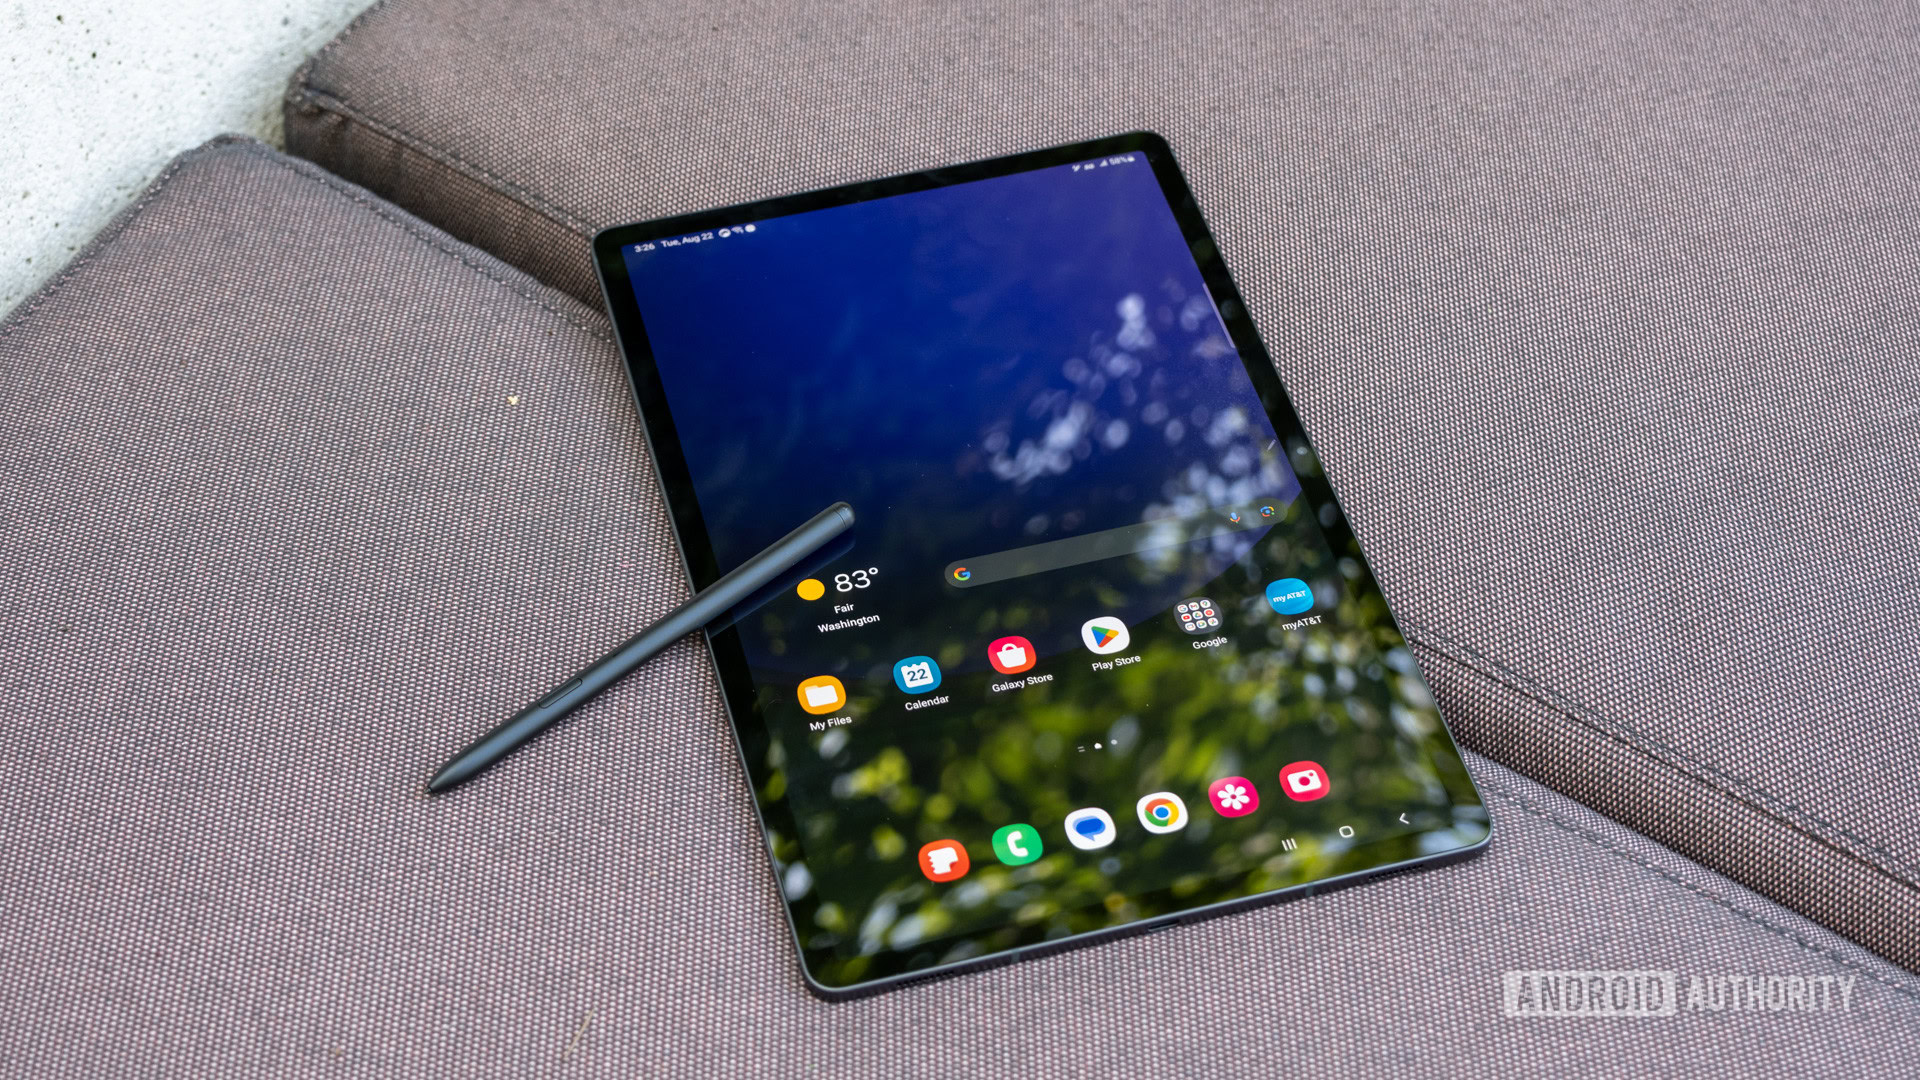 Samsung Galaxy Tab S10: Specs, rumors, and what we want to see